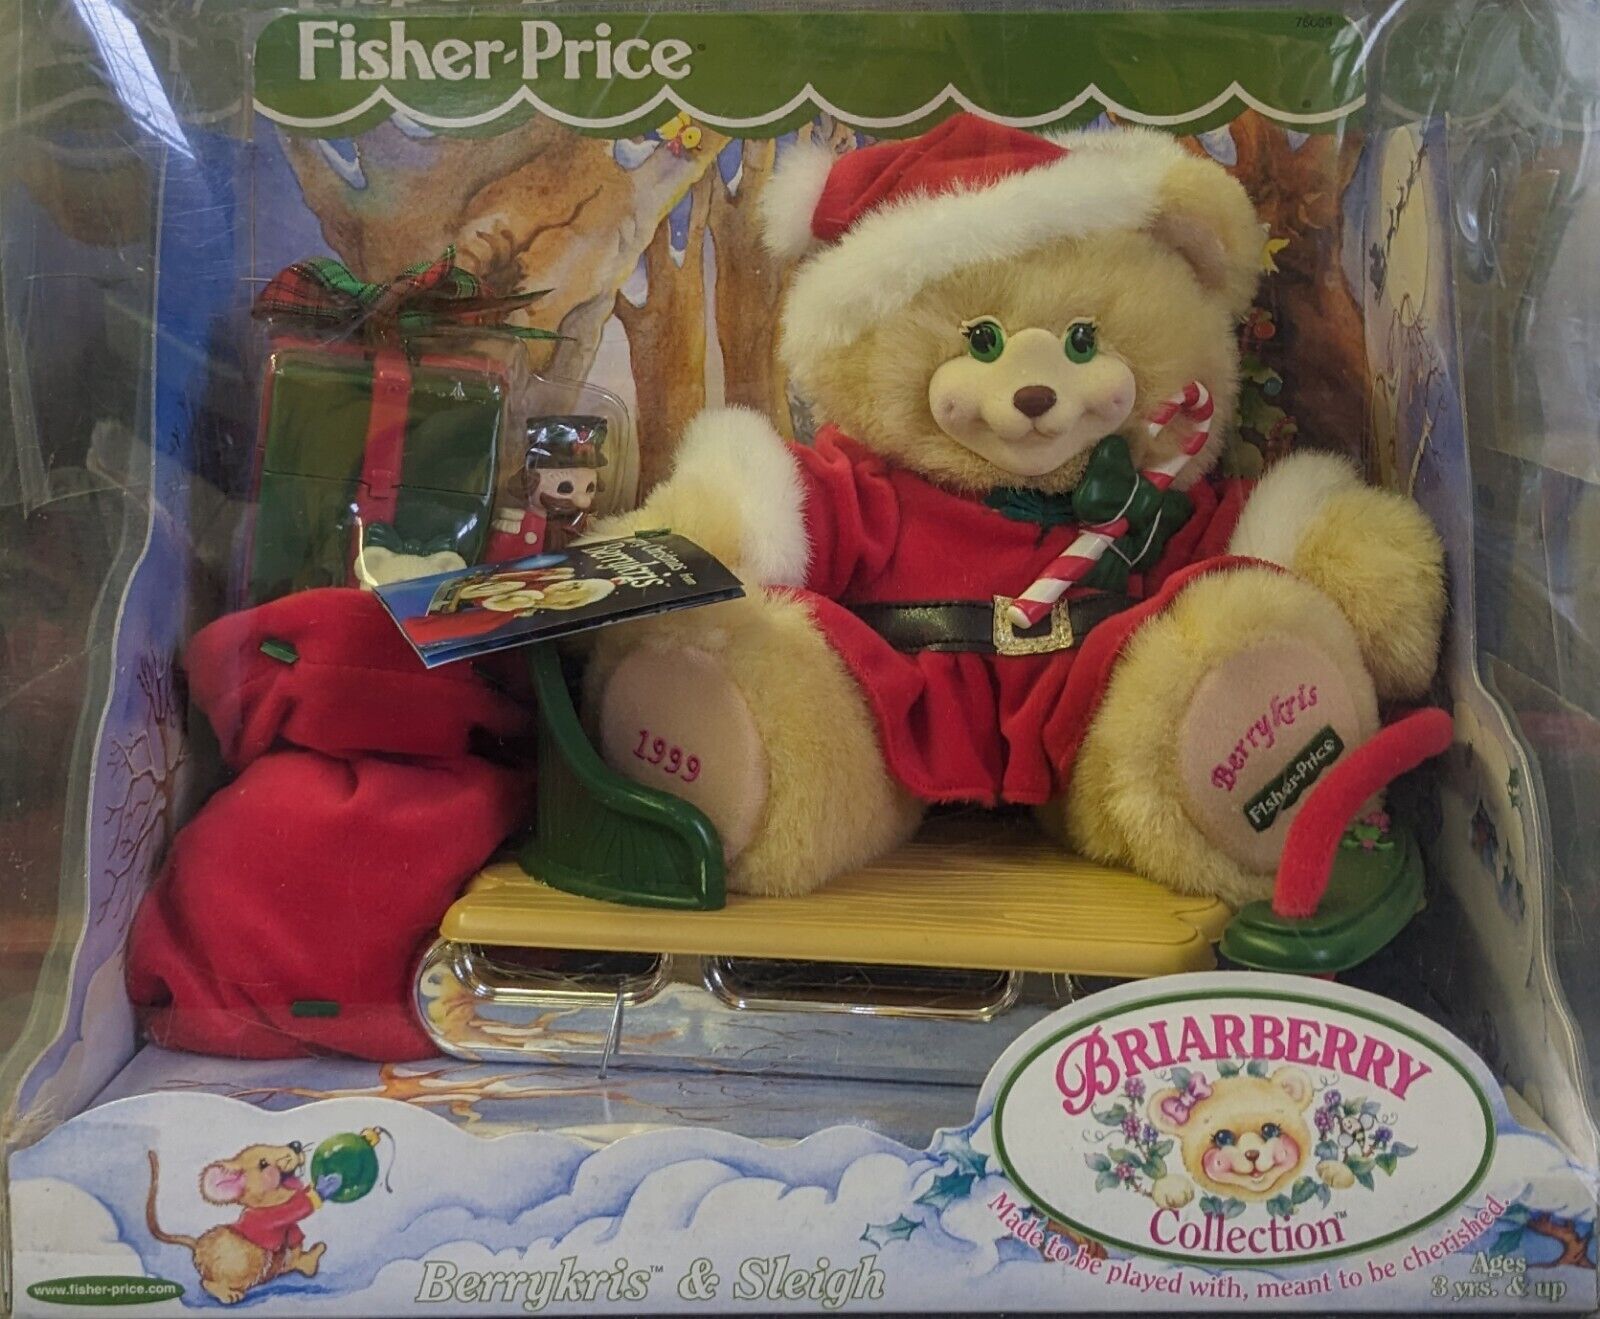 Briarberry Collection 1999 Christmas Berrykris & Sleigh Bear FISHER PRICE Décor